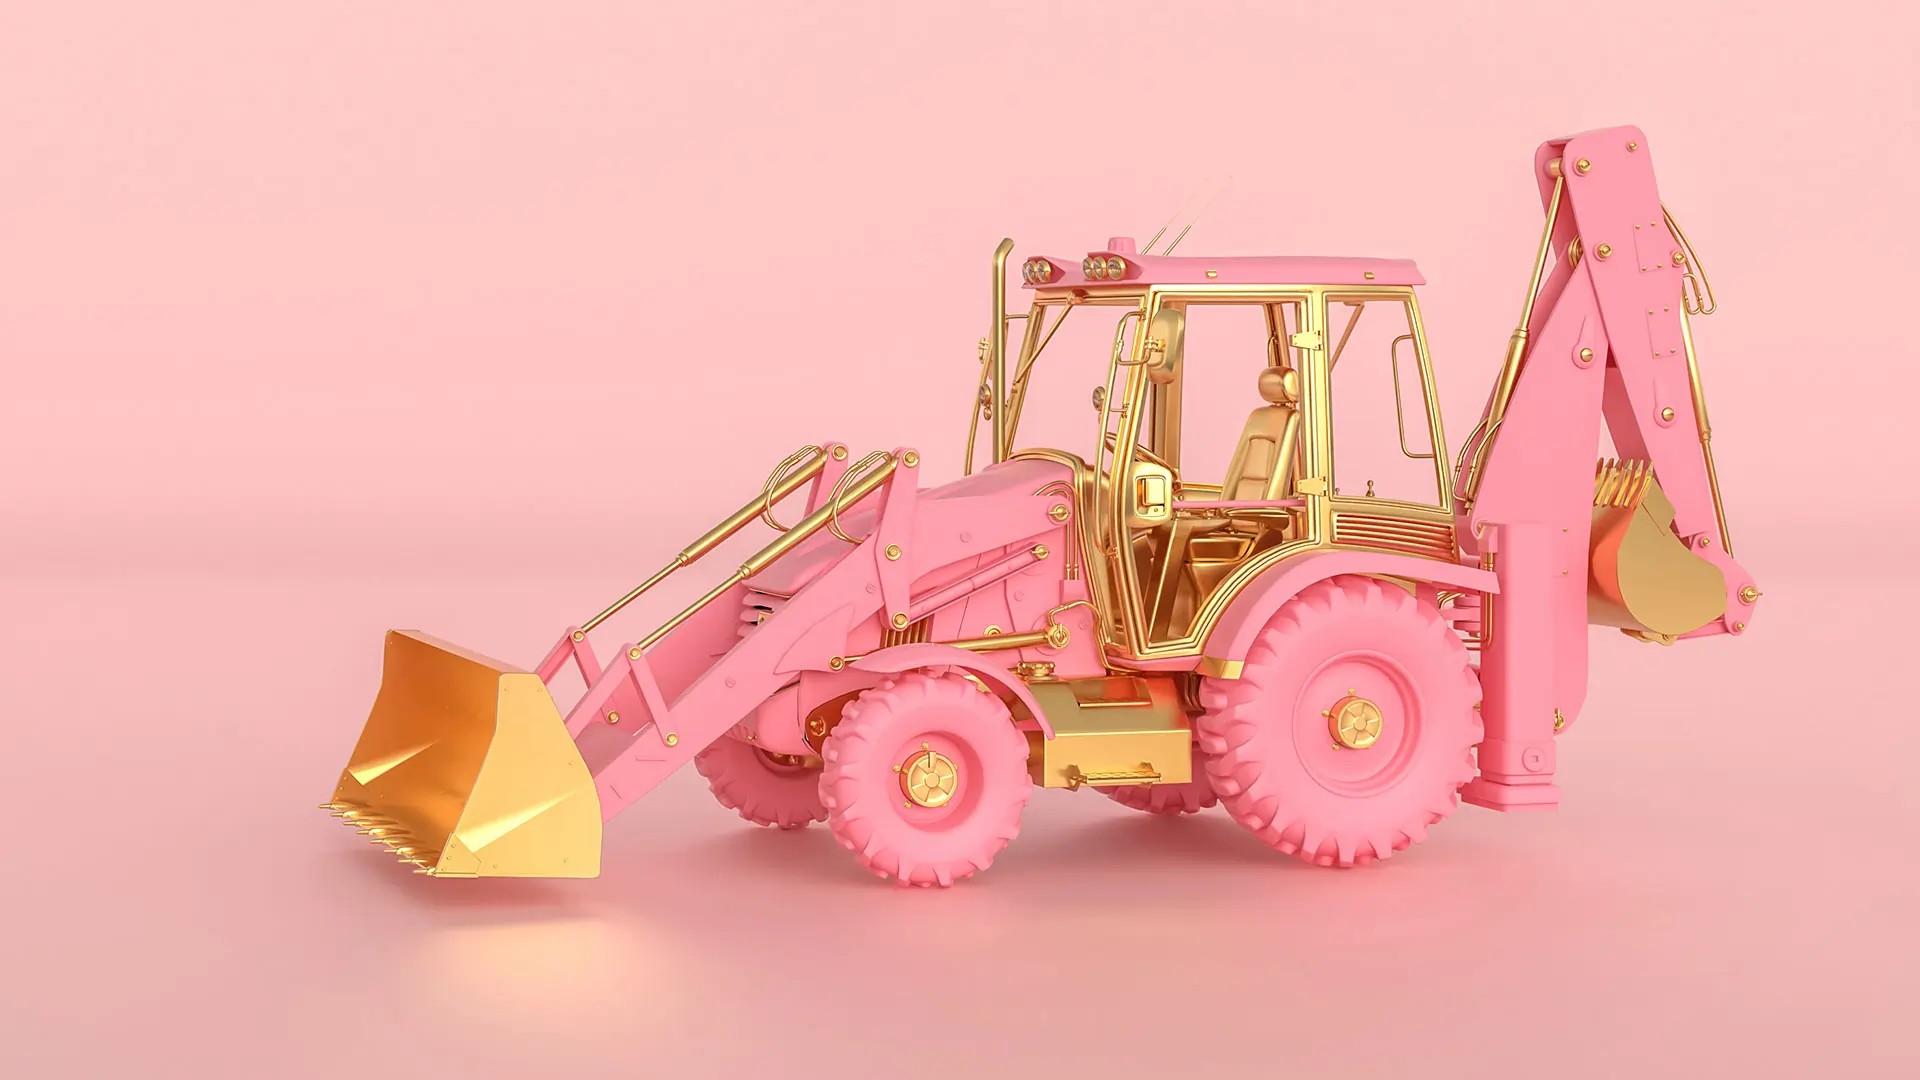 pink and gold excavator toy on light pink background